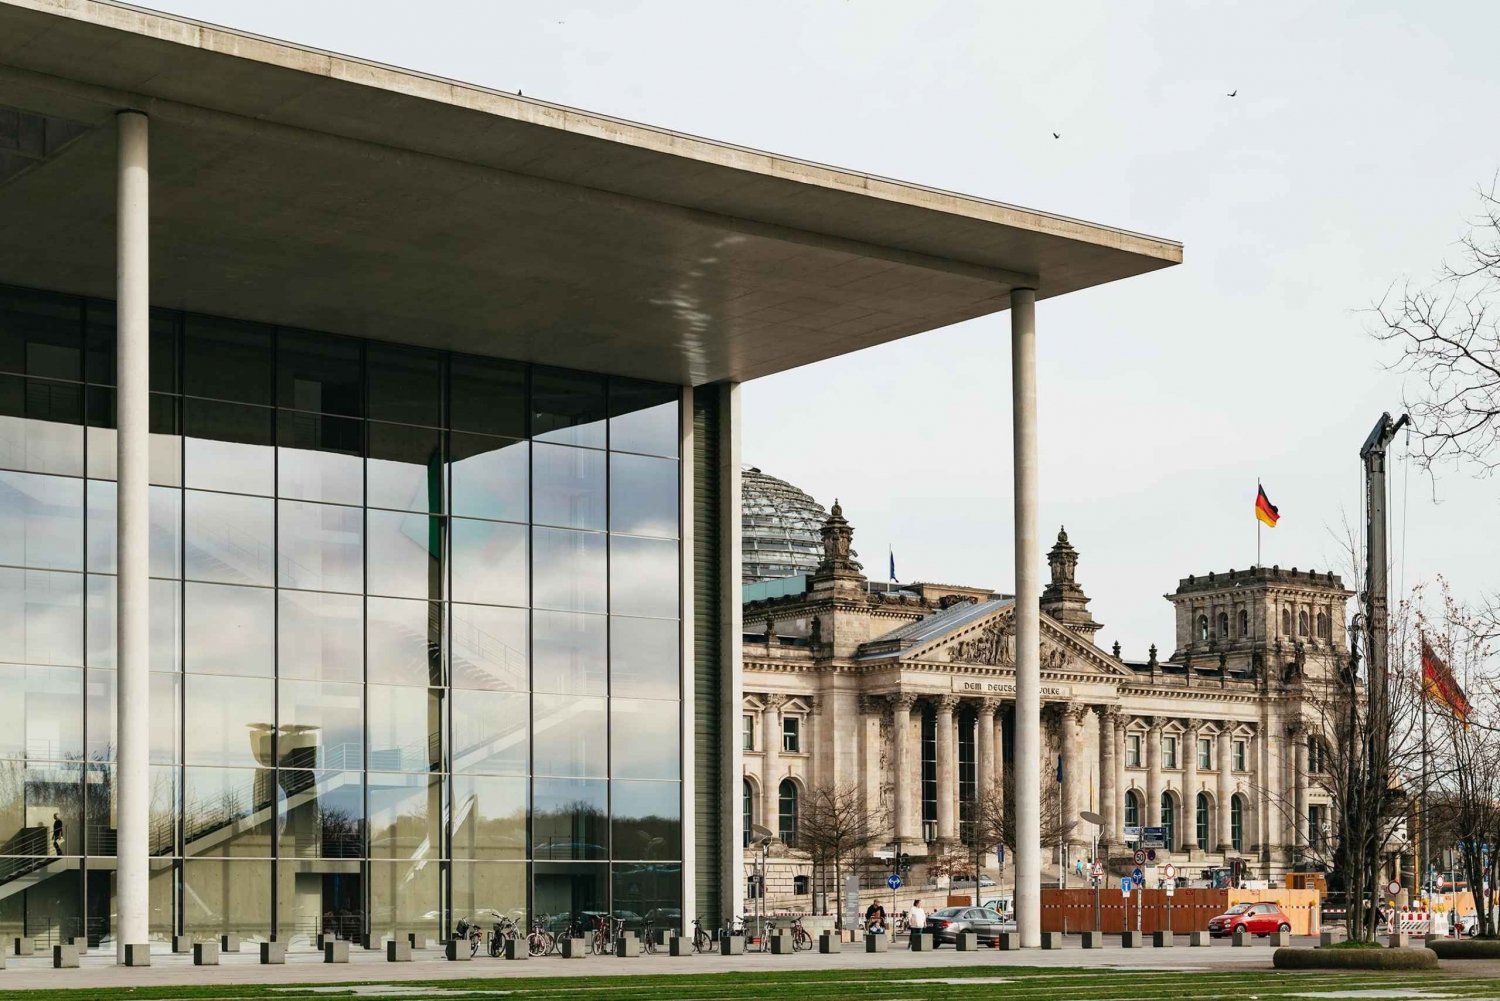 Berlin: Guided Walking Tour around the Reichstag